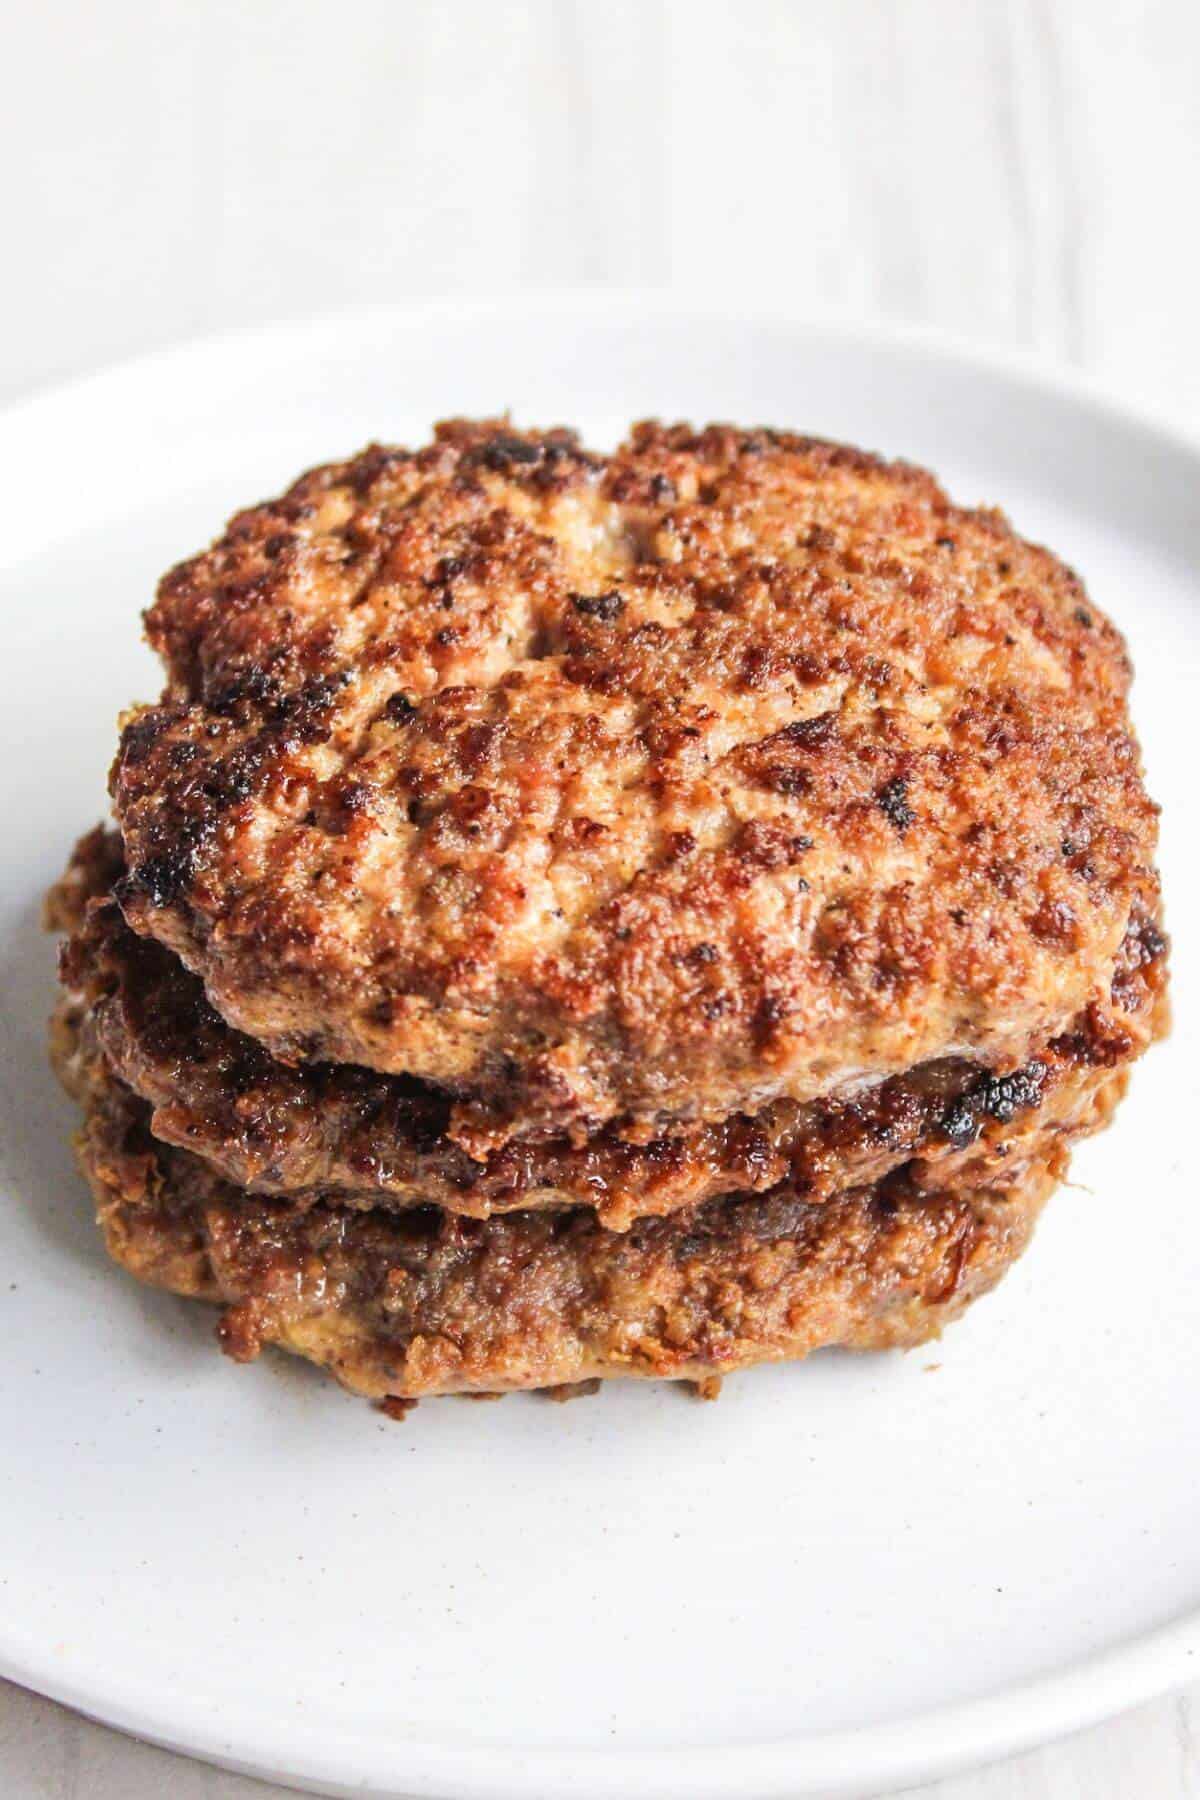 A stack of meat patties on a white plate.